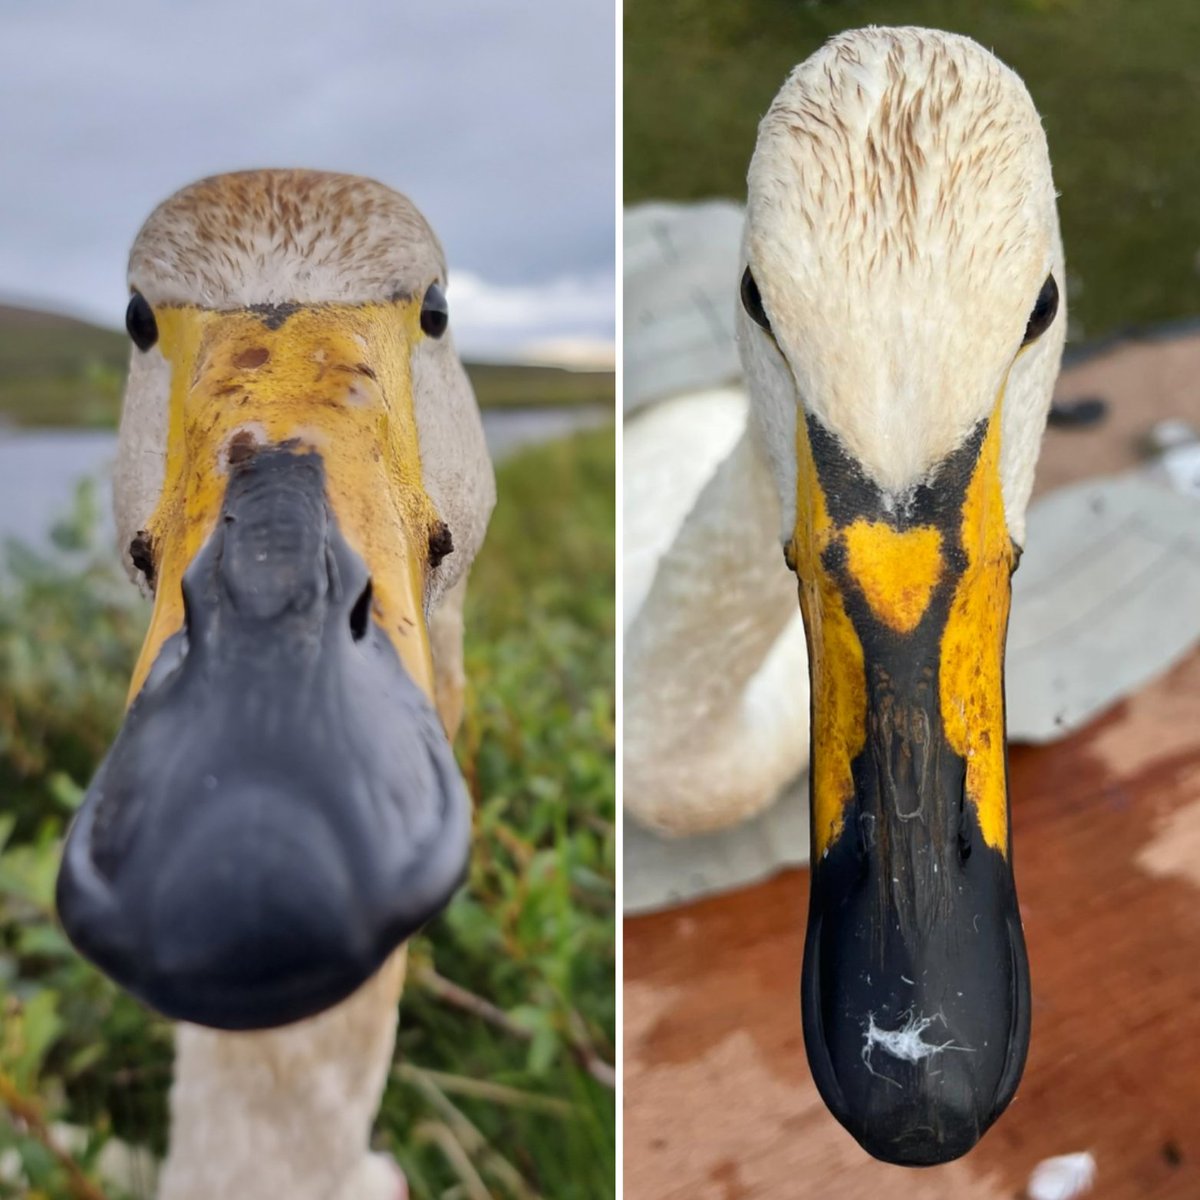 Did you know Whooper Swan bill patterns are total unique to each individual? Just like our fingerprints. Two of the types are known as yellow-nebs (left) and penny-faces (right). We mostly caught yellow-nebs, with a few penny-faces also 💛